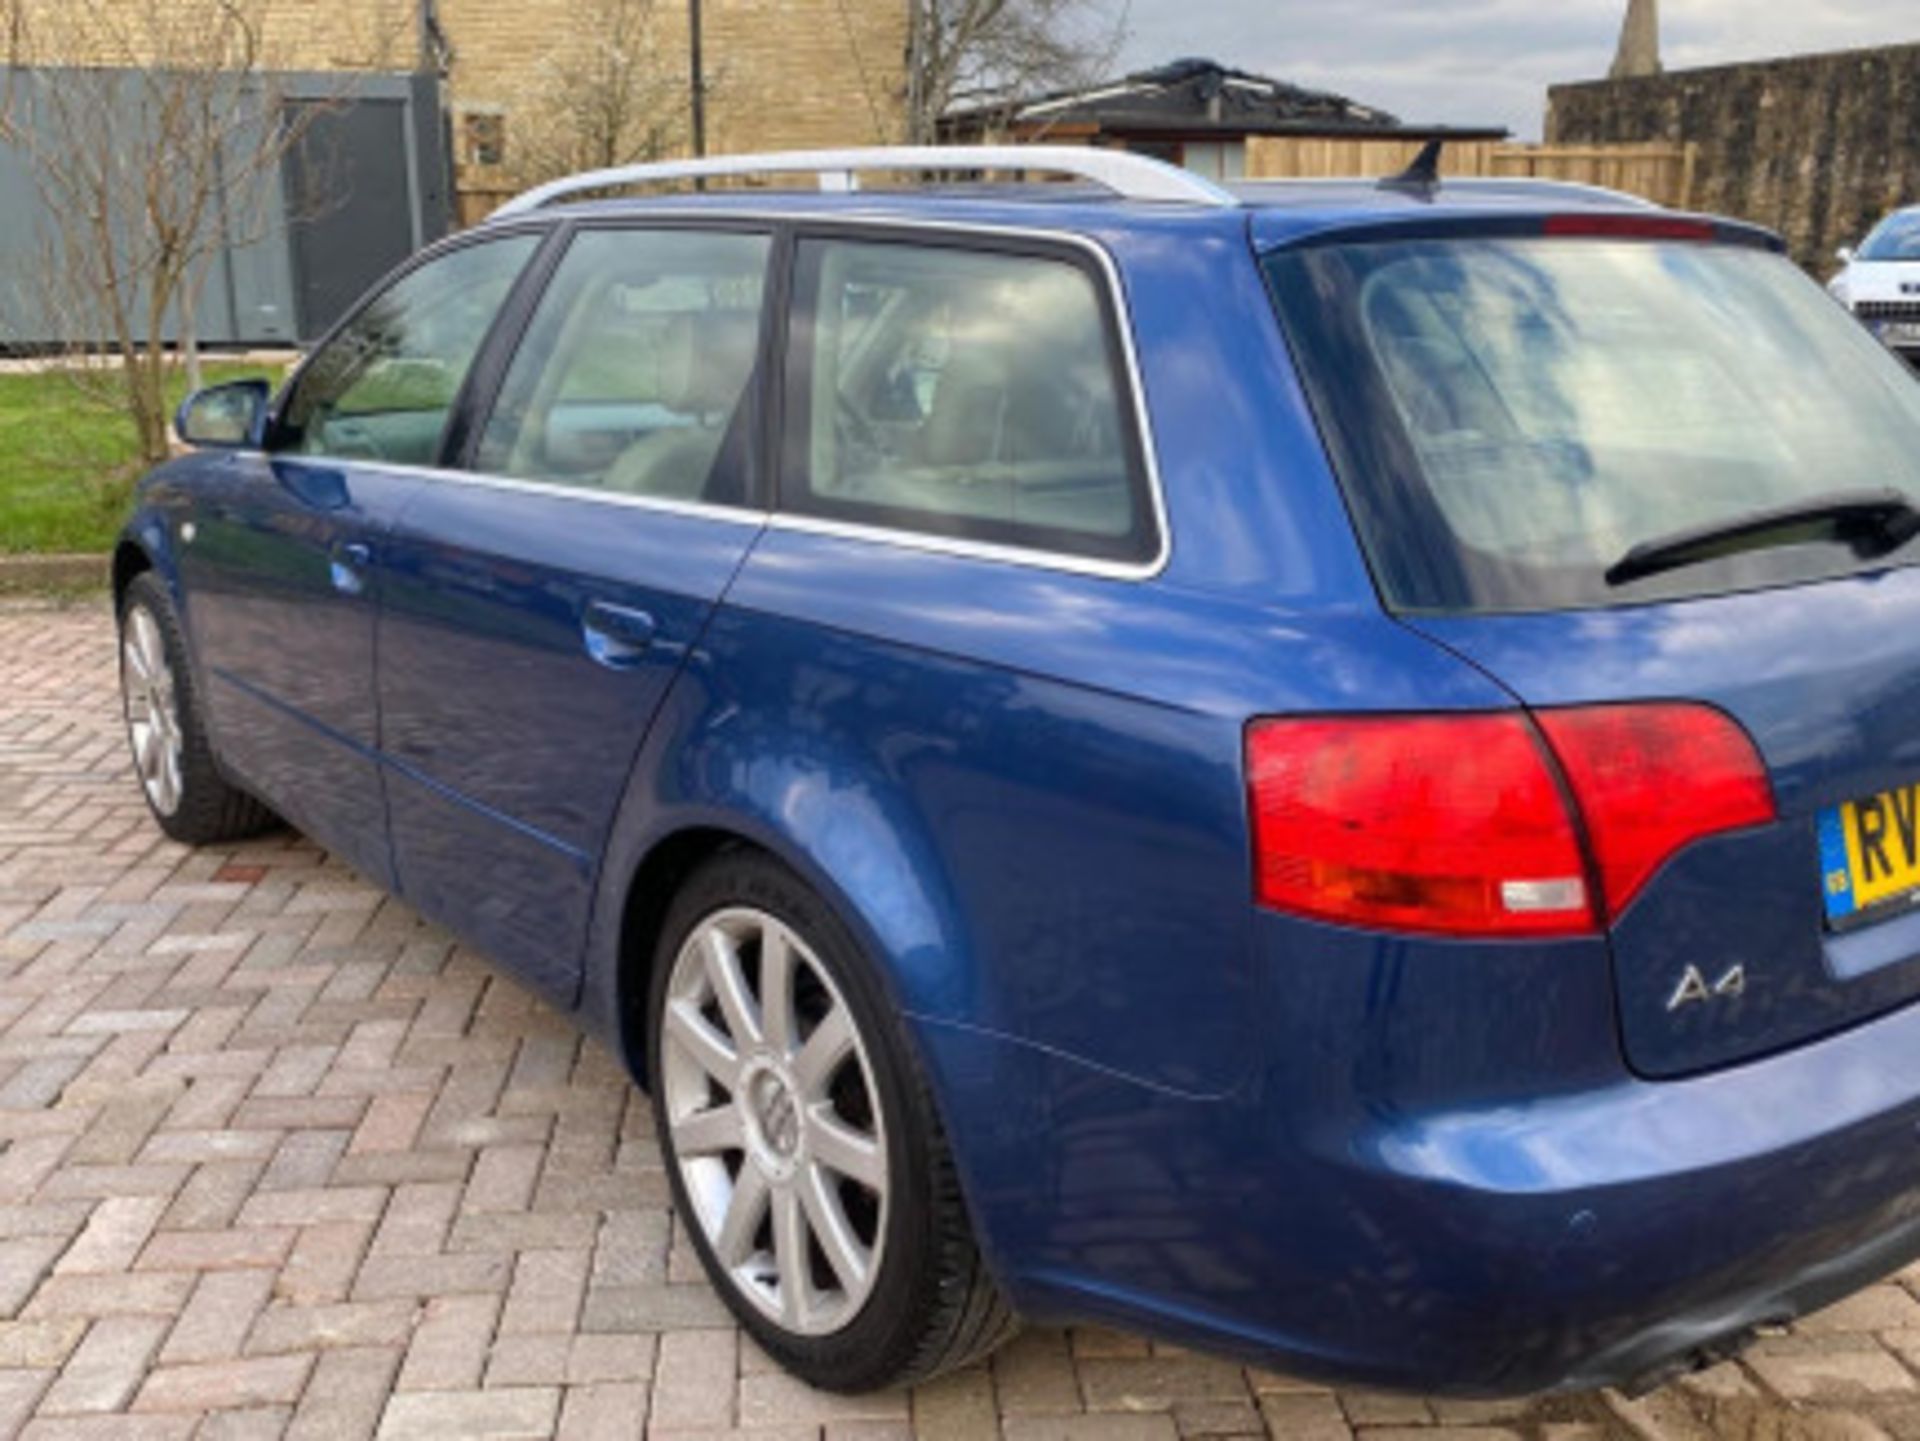 AUDI A4 AVANT 1.9 TDI SE 5DR ESTATE - RARE AND RELIABLE LUXURY WAGON >>--NO VAT ON HAMMER--<< - Image 37 of 97